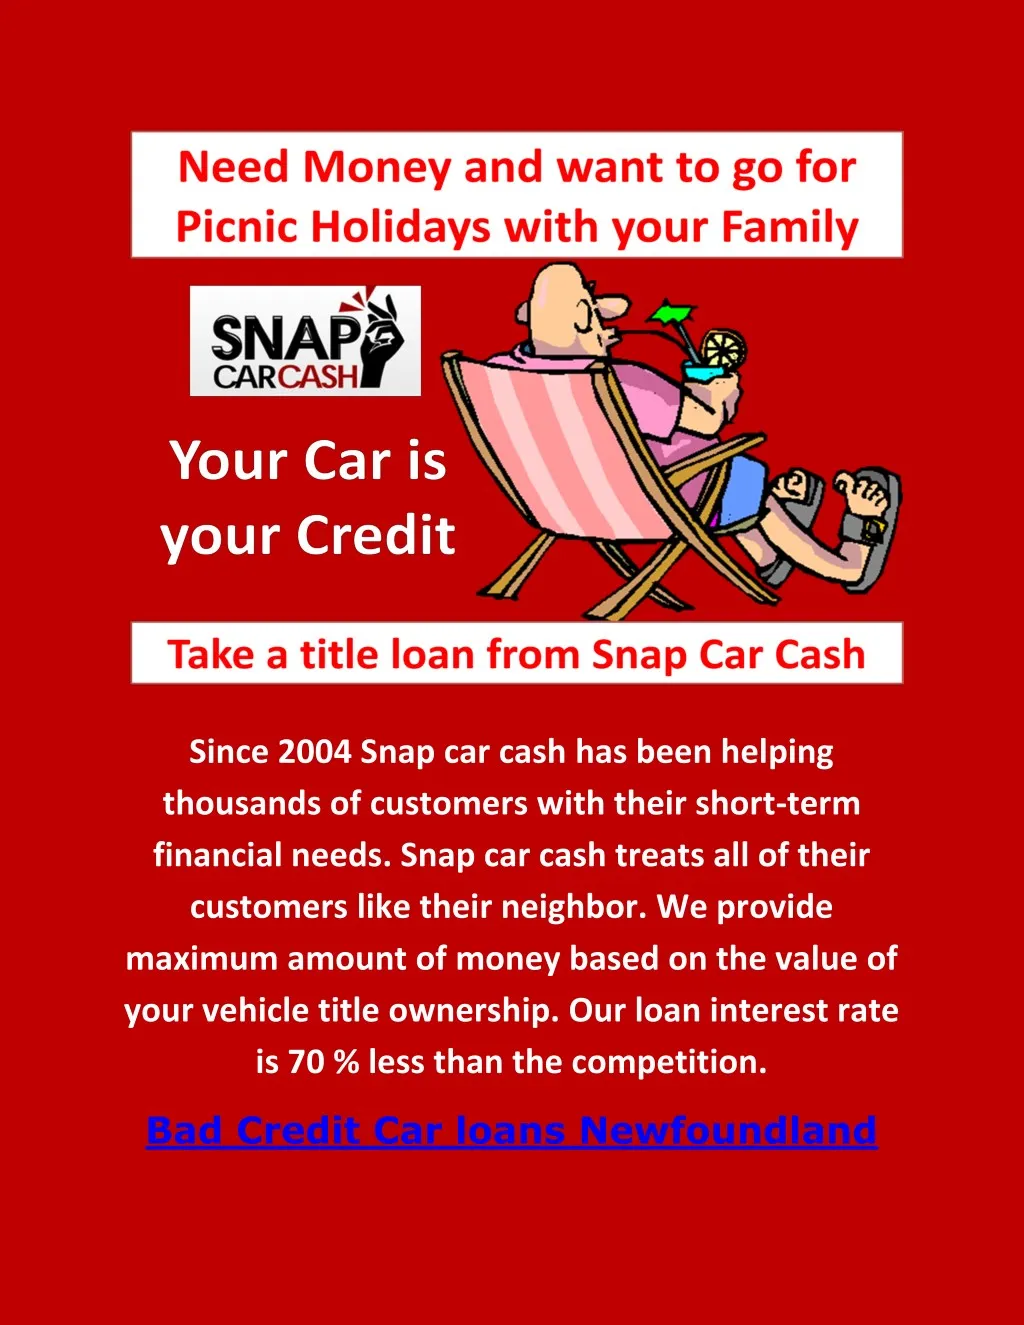 since 2004 snap car cash has been helping